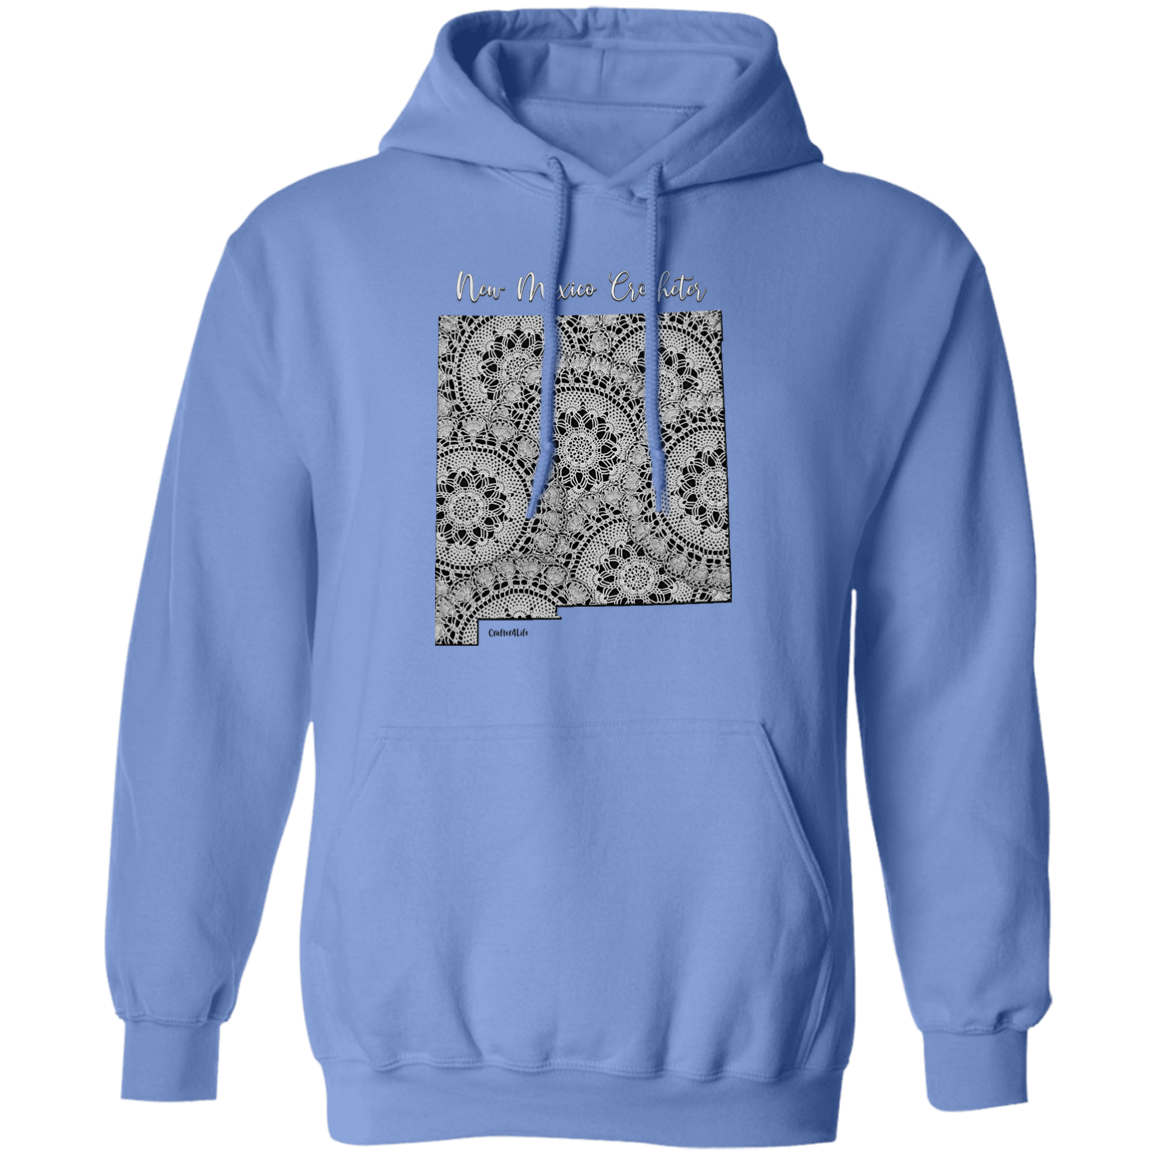 New Mexico Crocheter Pullover Hoodie